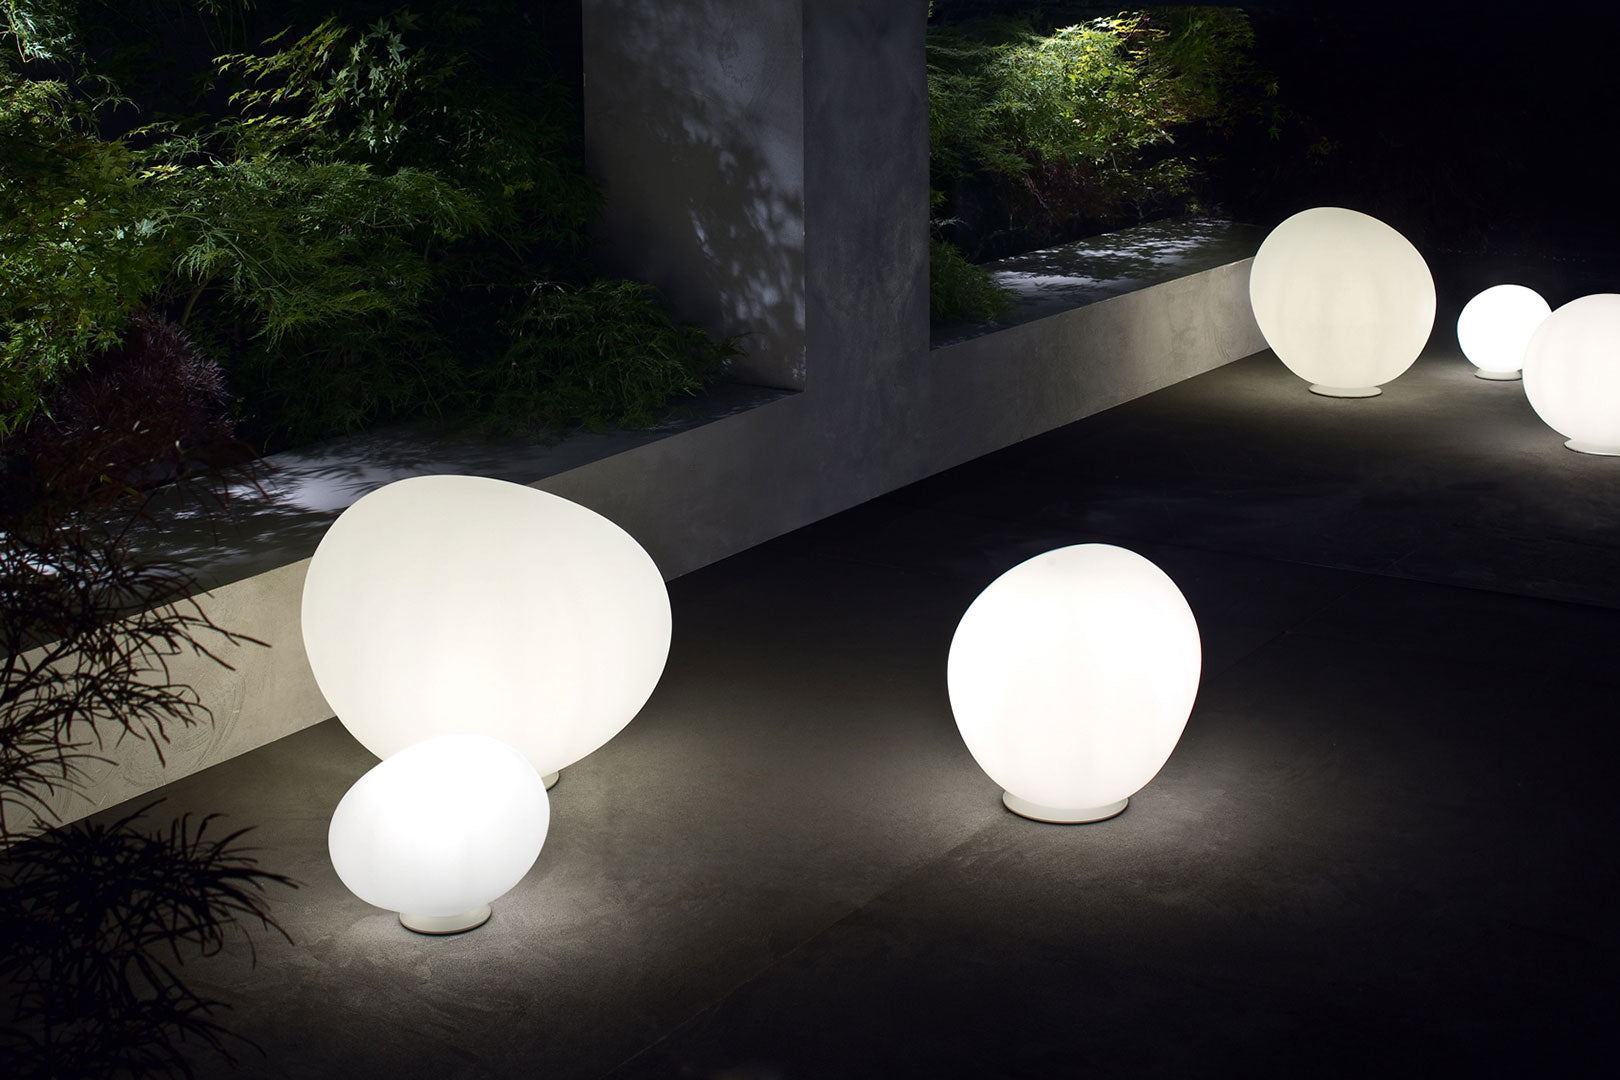 White Table light design Outdoor, Best table lamps, home decor lamps,Exterior table lamps